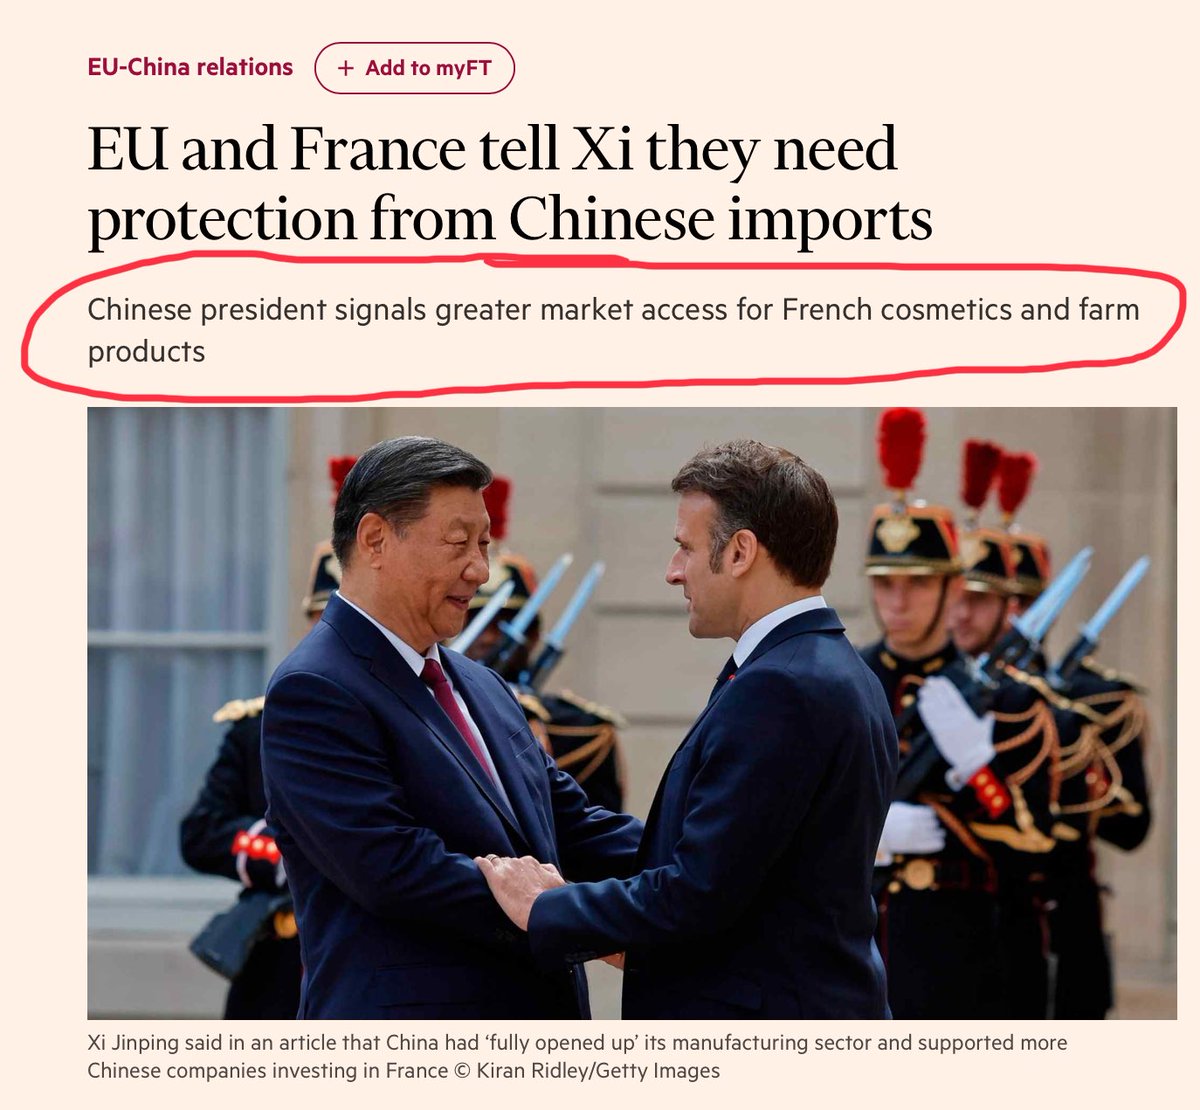 It’s been 23 years since China joined the WTO and they’re still going around offering the same access they did since they were negotiation its accession. 🤔